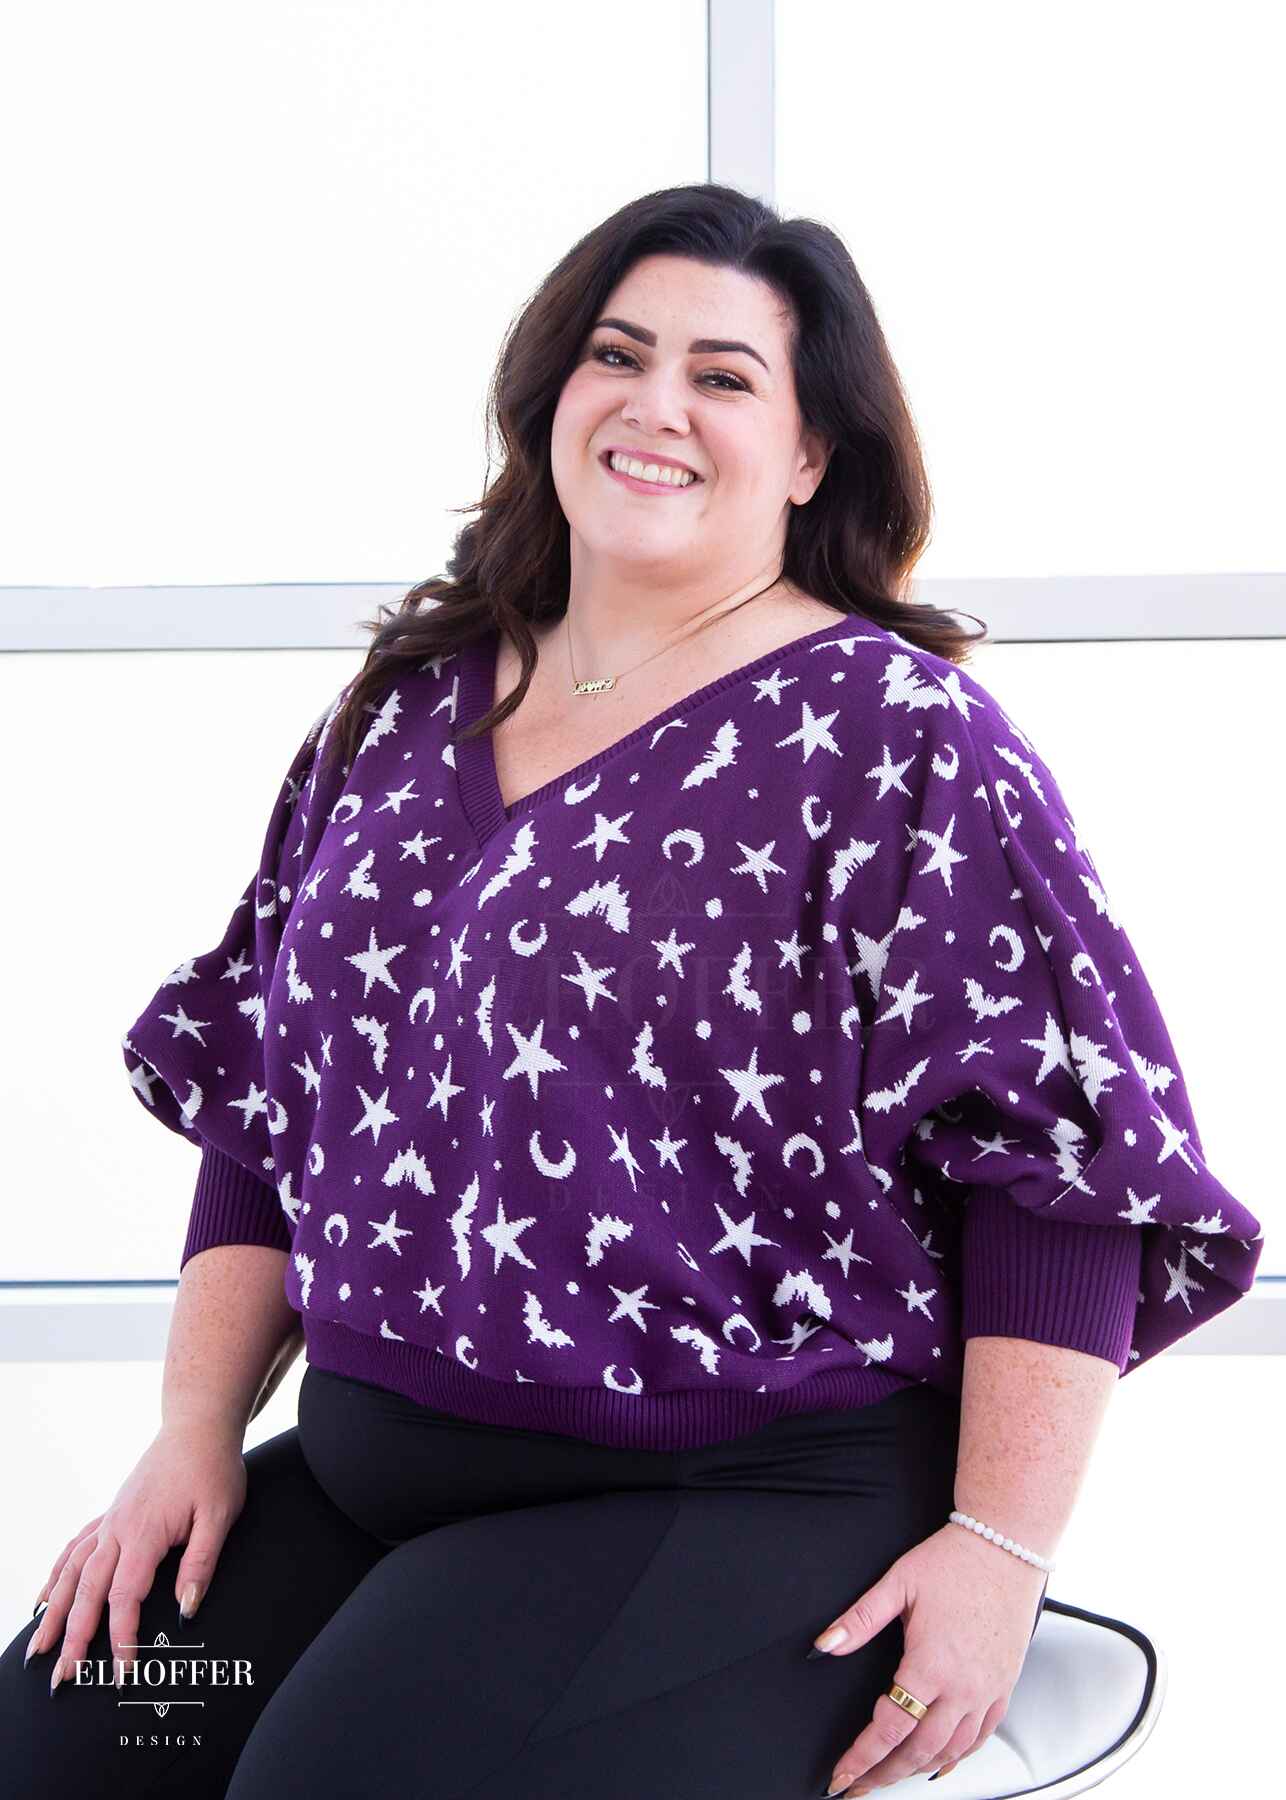 Stacy, a light skinned XL model with shoulder length wavy dark brown hair, is smiling while wearing an oversized v neck cropped sweater with batwing sleeves that gather at the wrist.  The main body of the sweater is purple with a white bat, star, moon, and dot pattern repeated throughout.